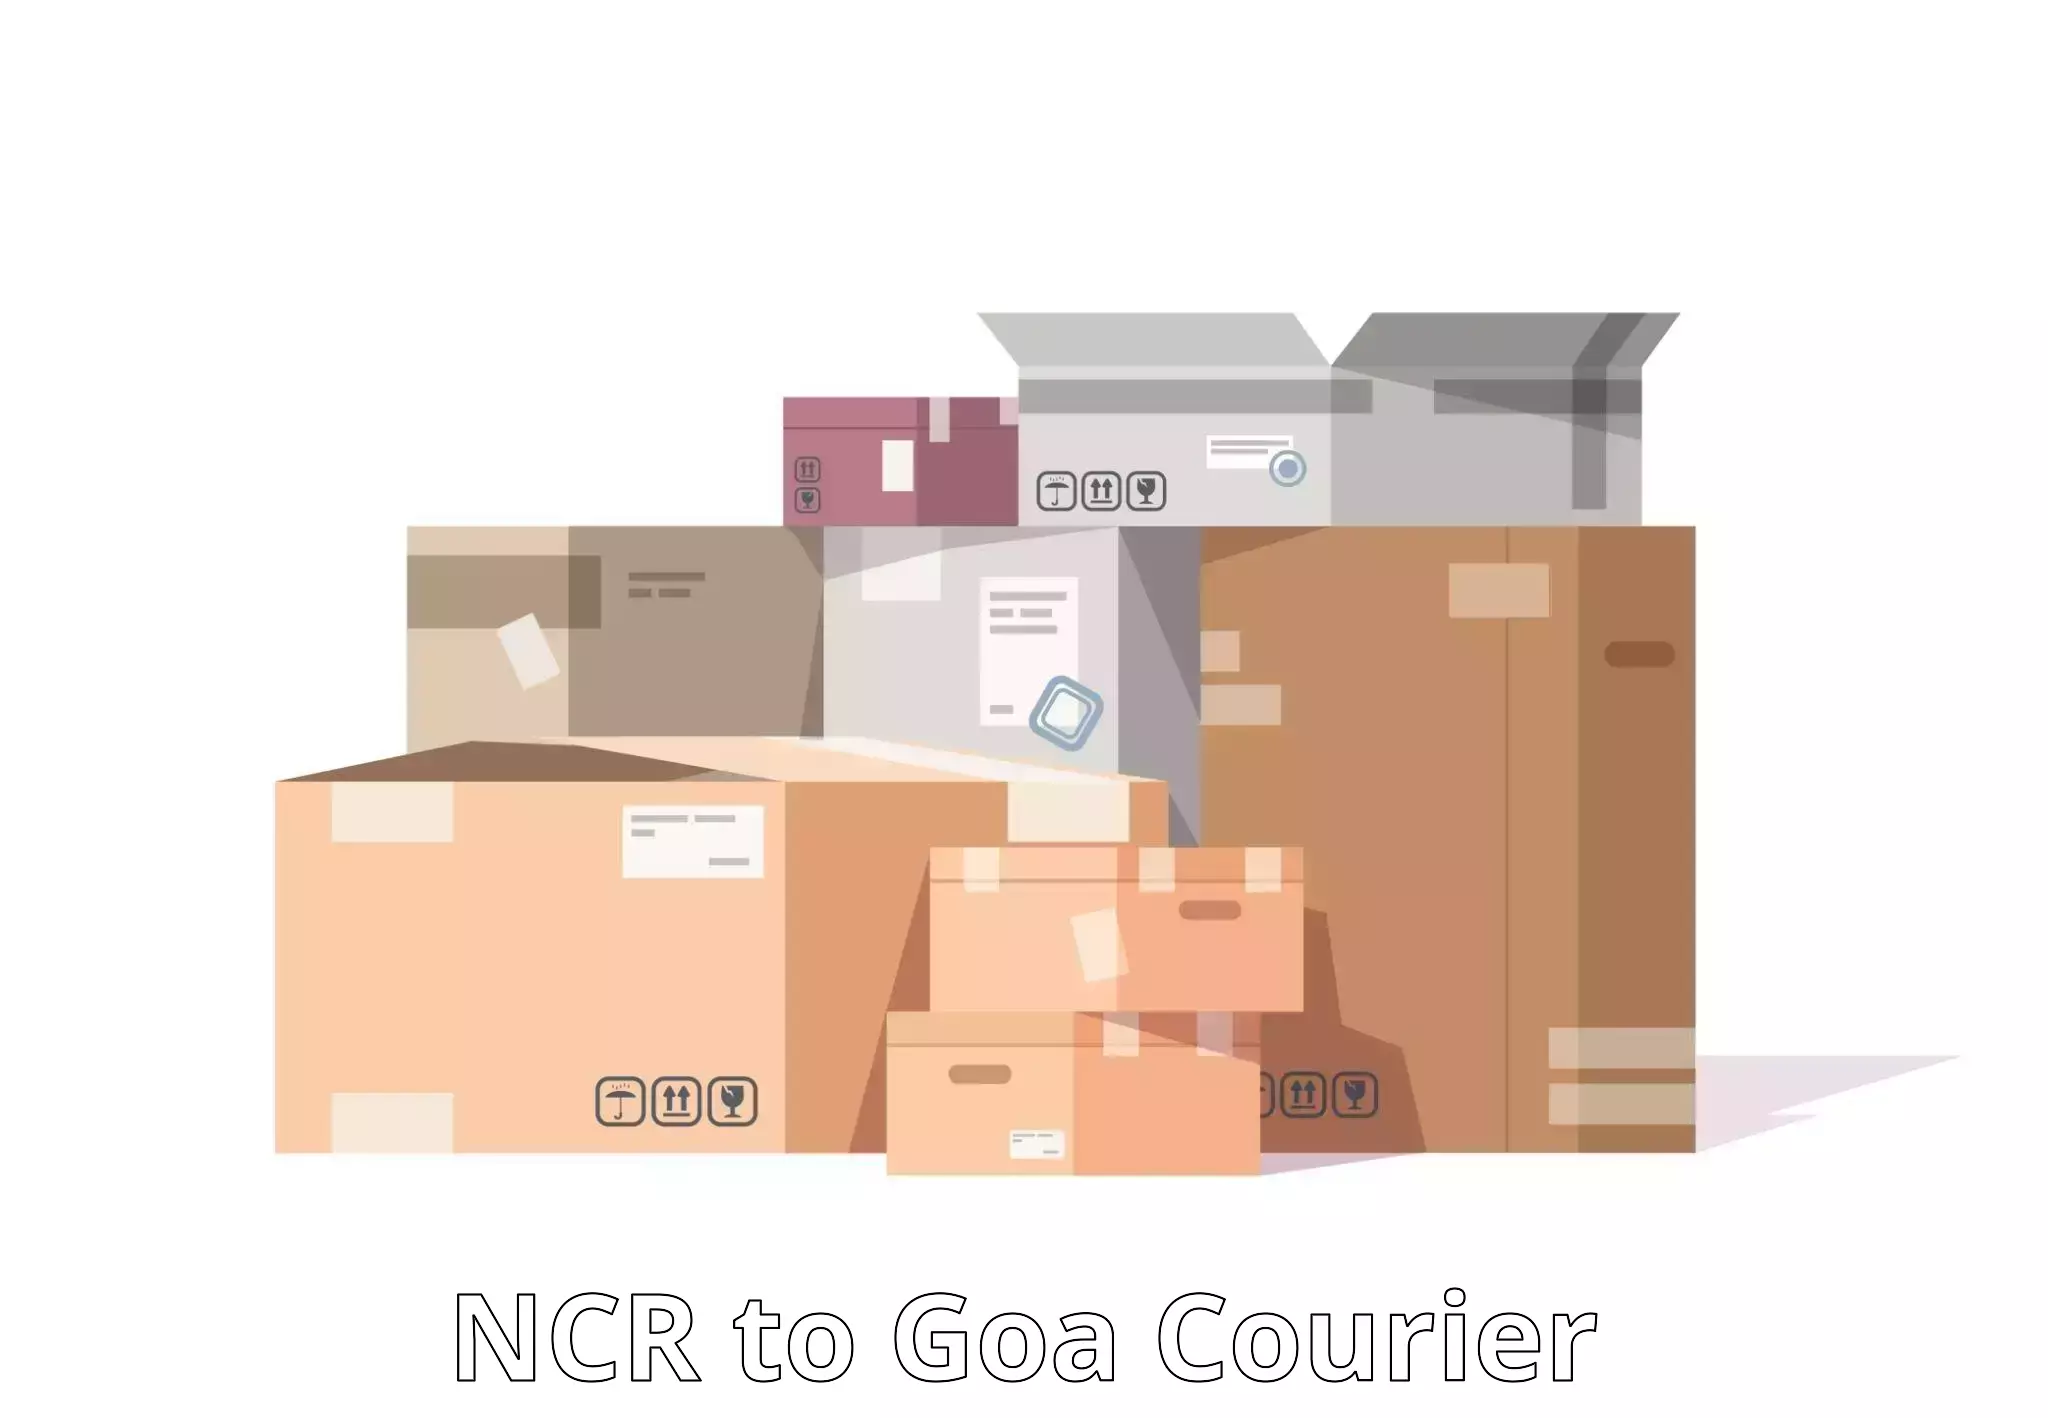 High-speed parcel service NCR to Goa